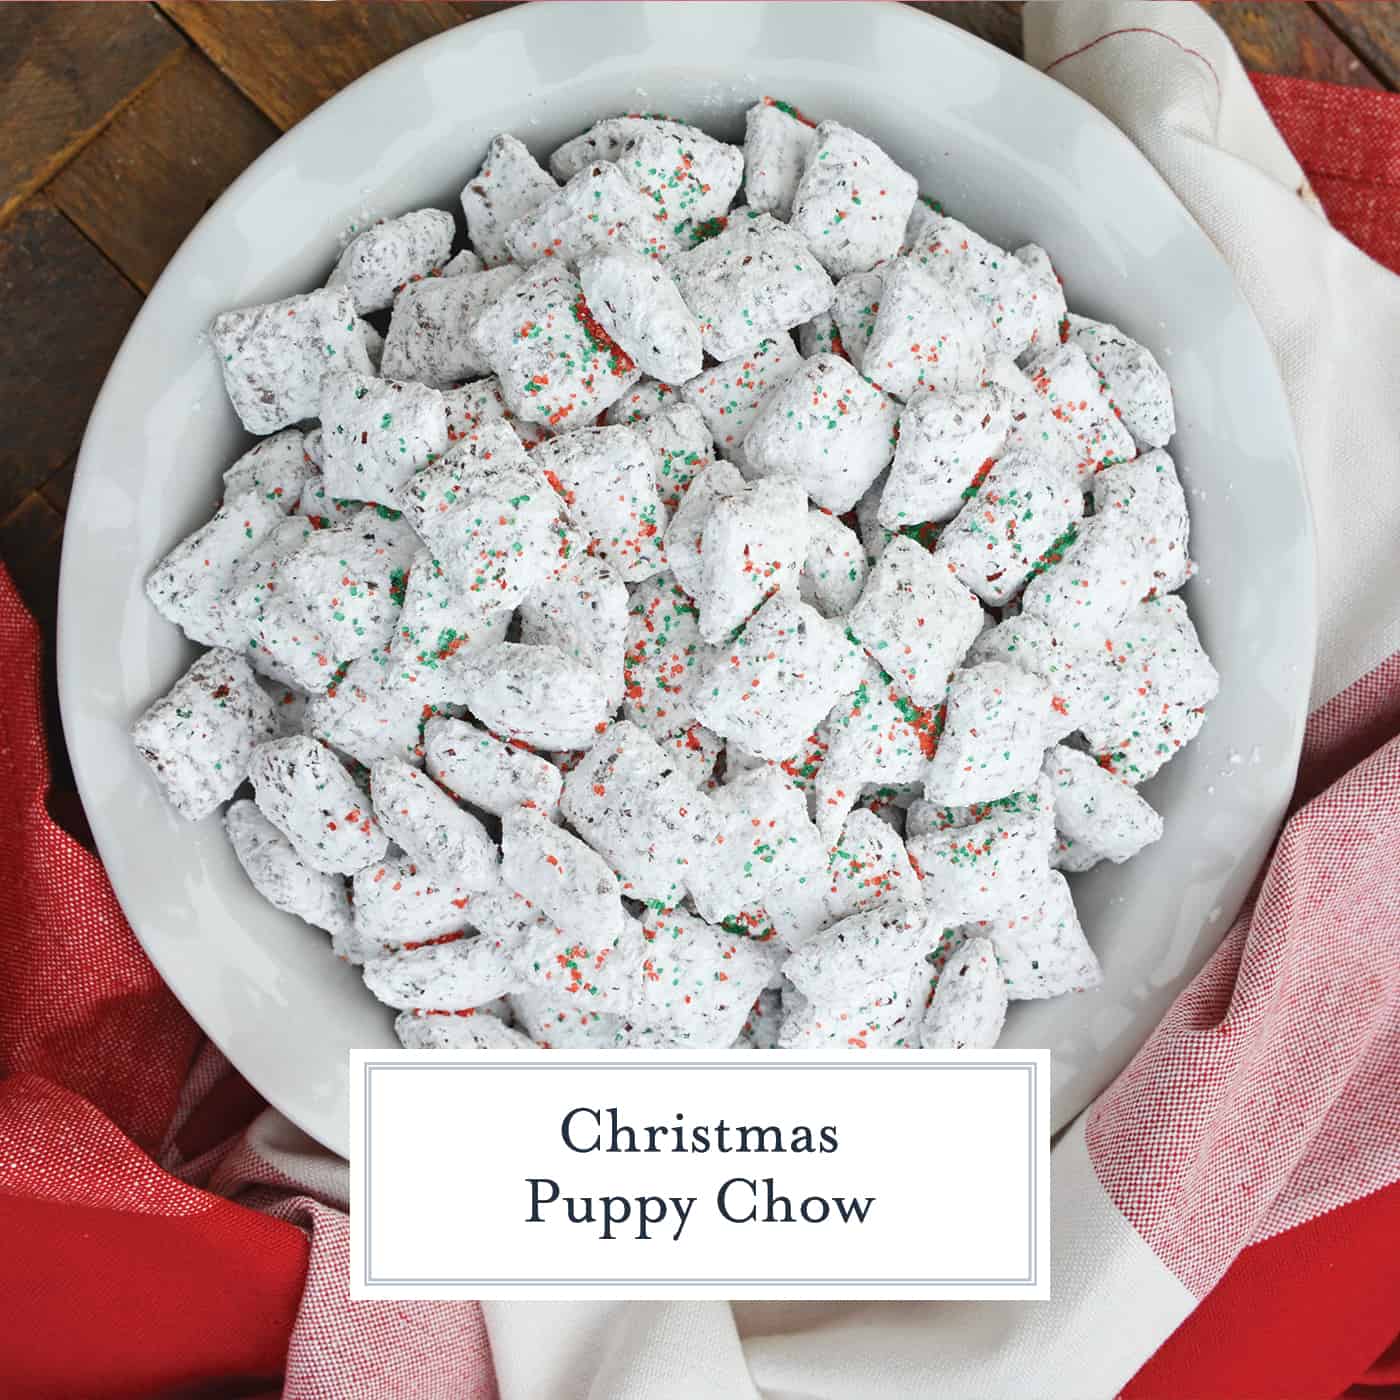 Christmas Puppy Chow Transforms A Traditional Muddy Buddy Recipe Into A Festive Reindeer Chow Mix,Flan Recipe Sweetened Condensed Milk